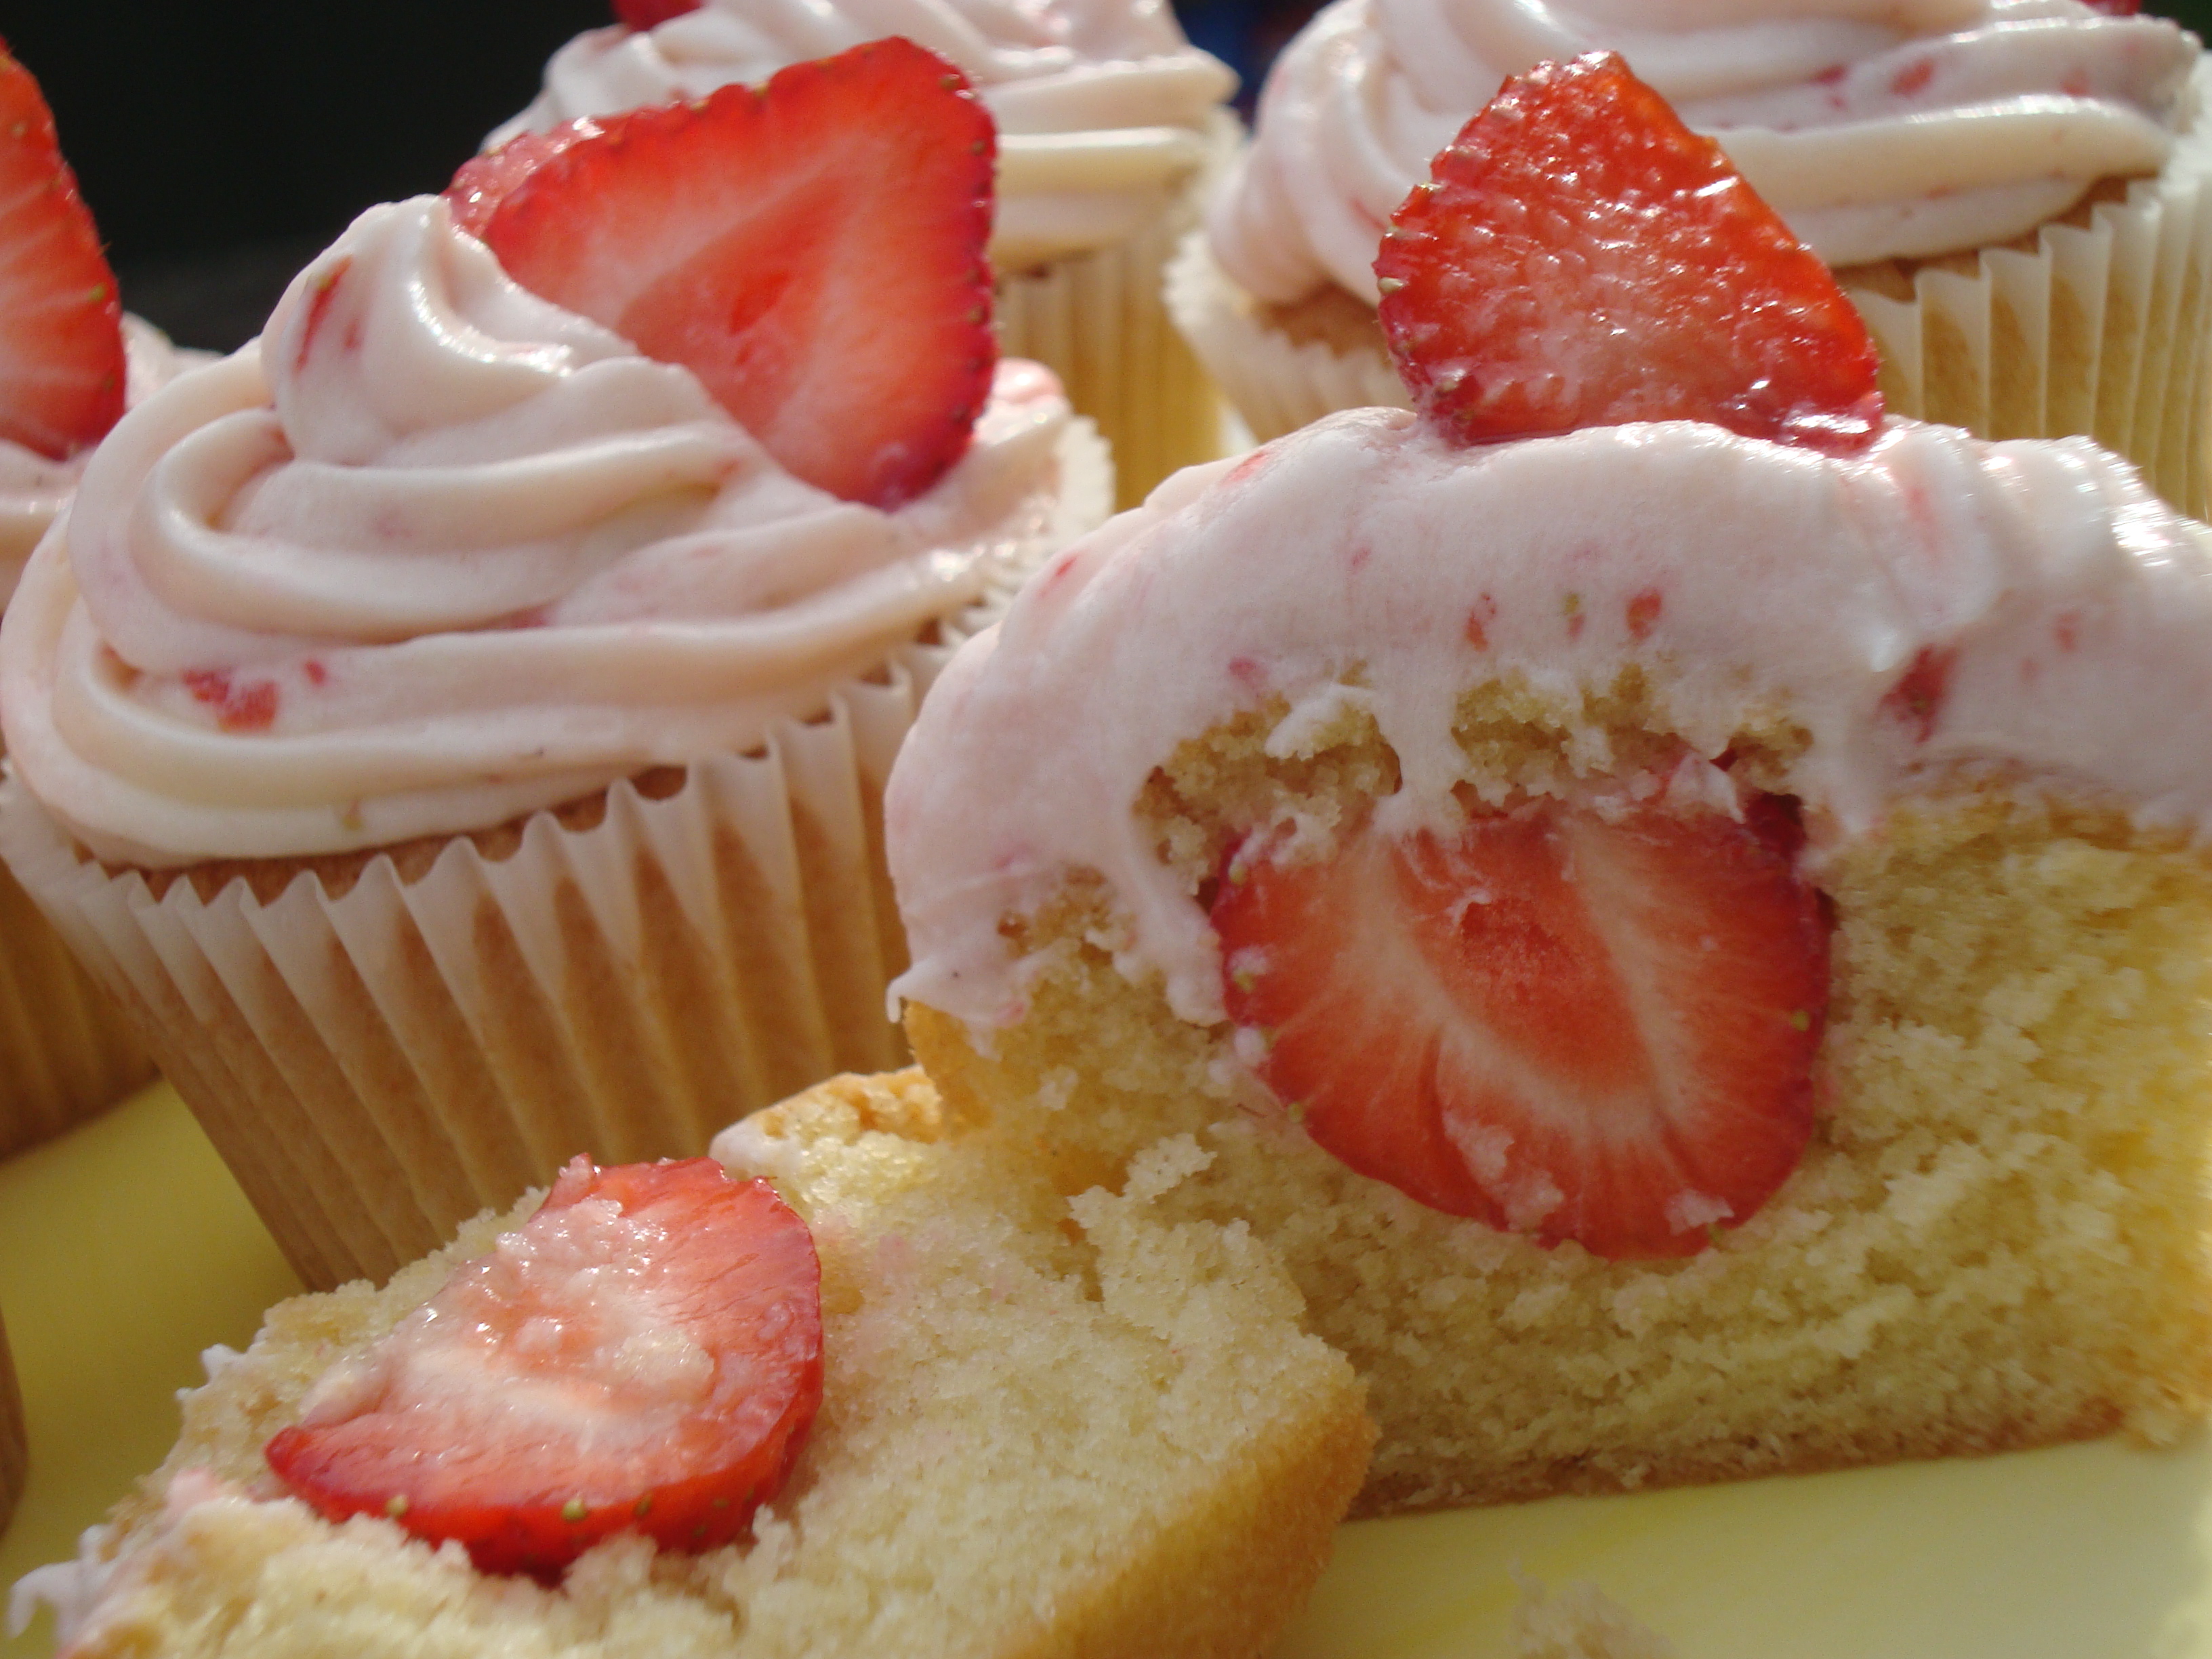 Cupcakes with Strawberries